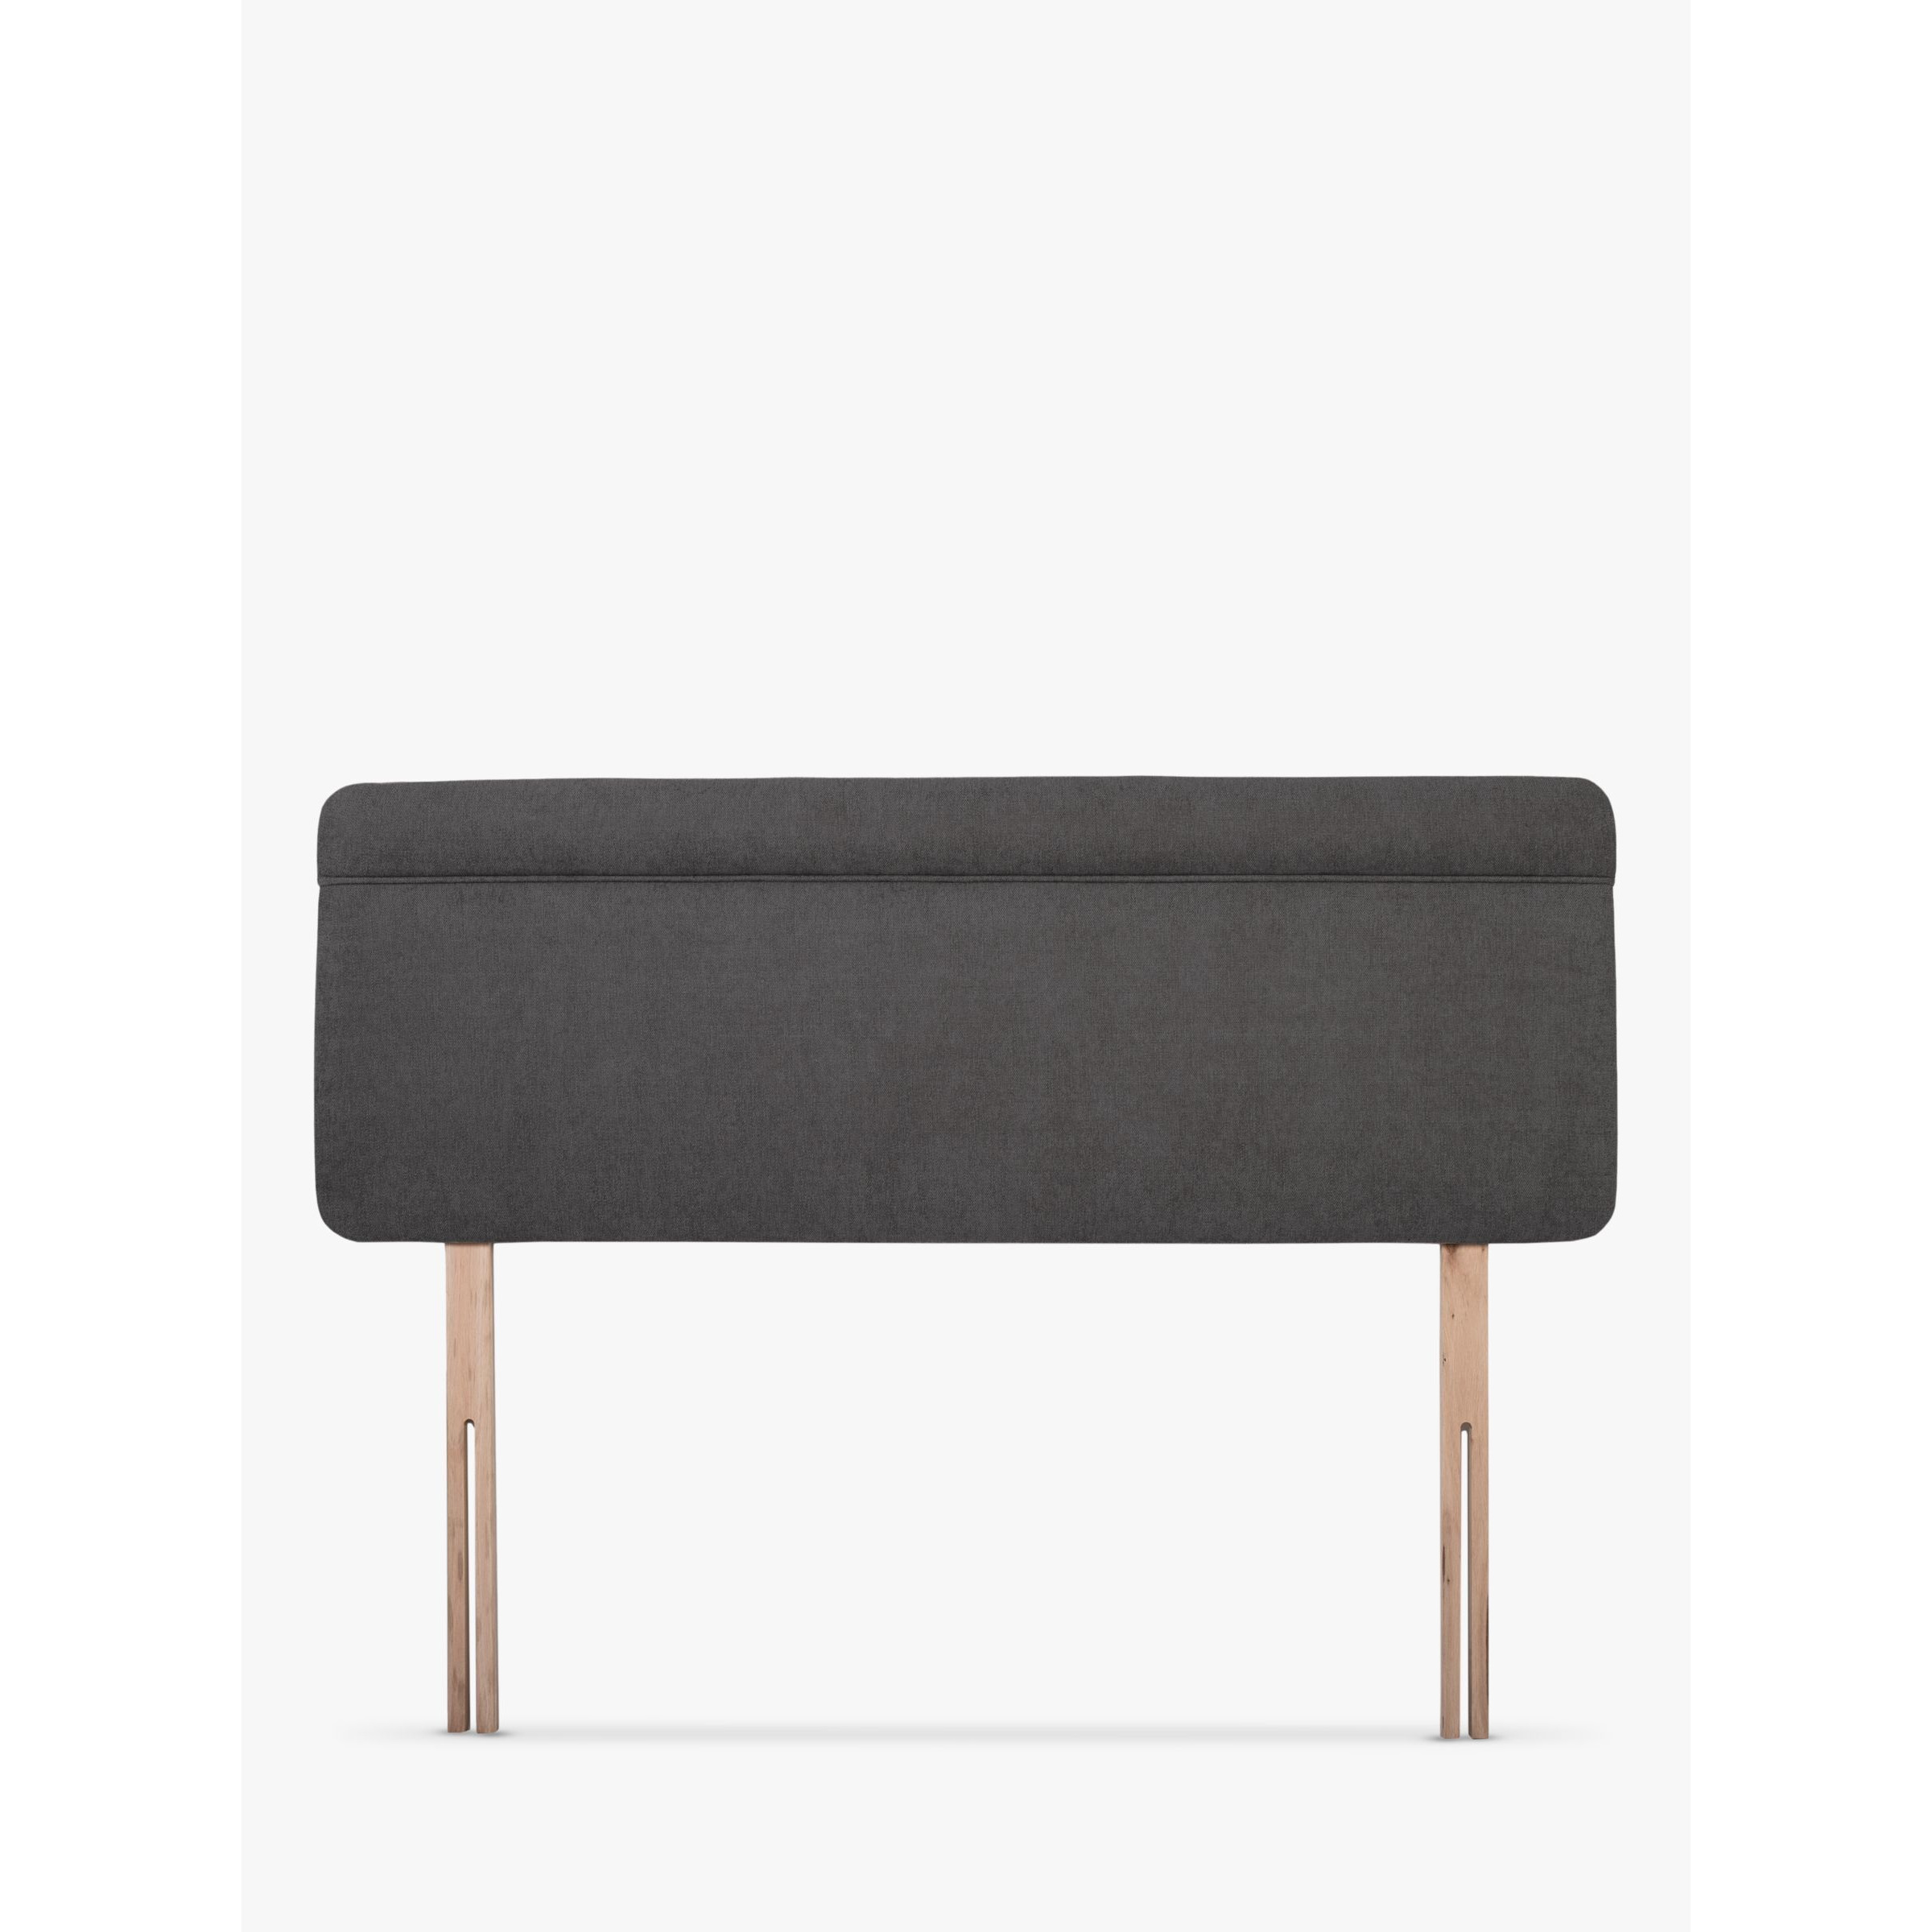 John Lewis Theale Upholstered Headboard, Small Double - image 1